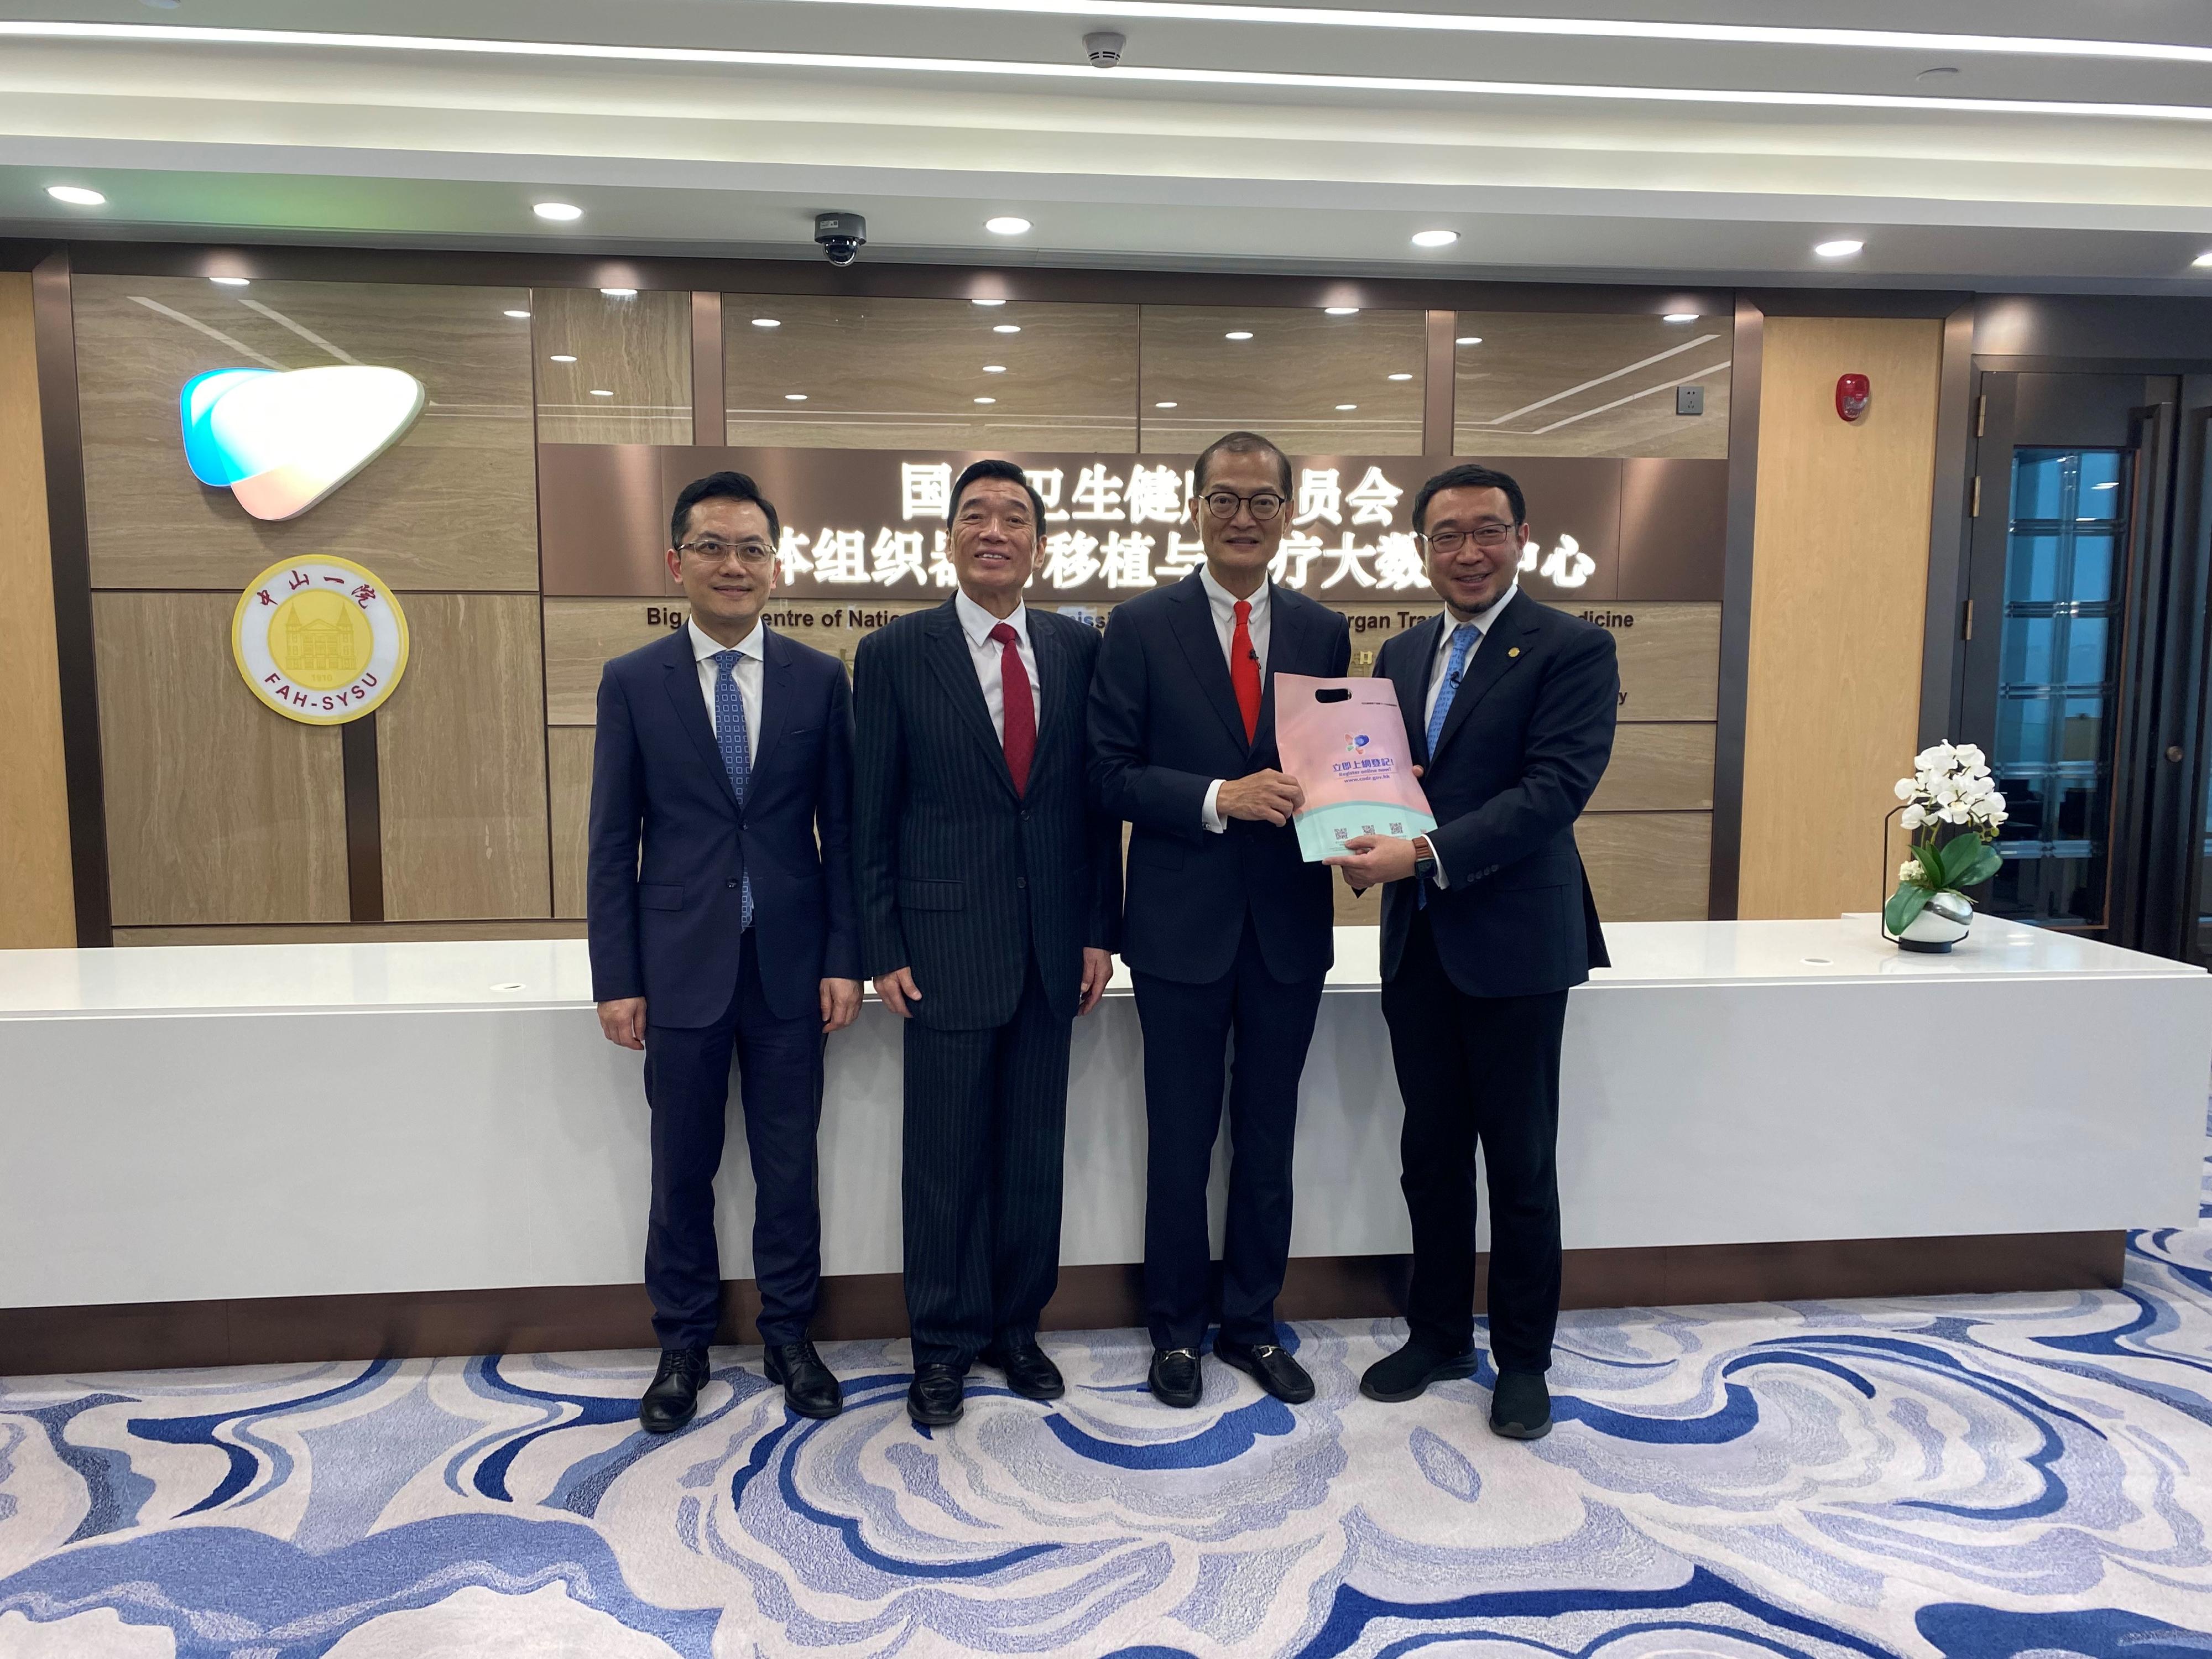 The Secretary for Health, Professor Lo Chung-mau, led his delegation to visit the Big Data Centre of National Health Commission for Human Tissue, Organ Transplant and Medicine. Photo shows Professor Lo (second right) presenting a souvenir to the Centre's Director, Professor Wang Haibo (first right). The Director of Health, Dr Ronald Lam (first left), and the Chairman of the Hospital Authority, Mr Henry Fan (second left), also attended.